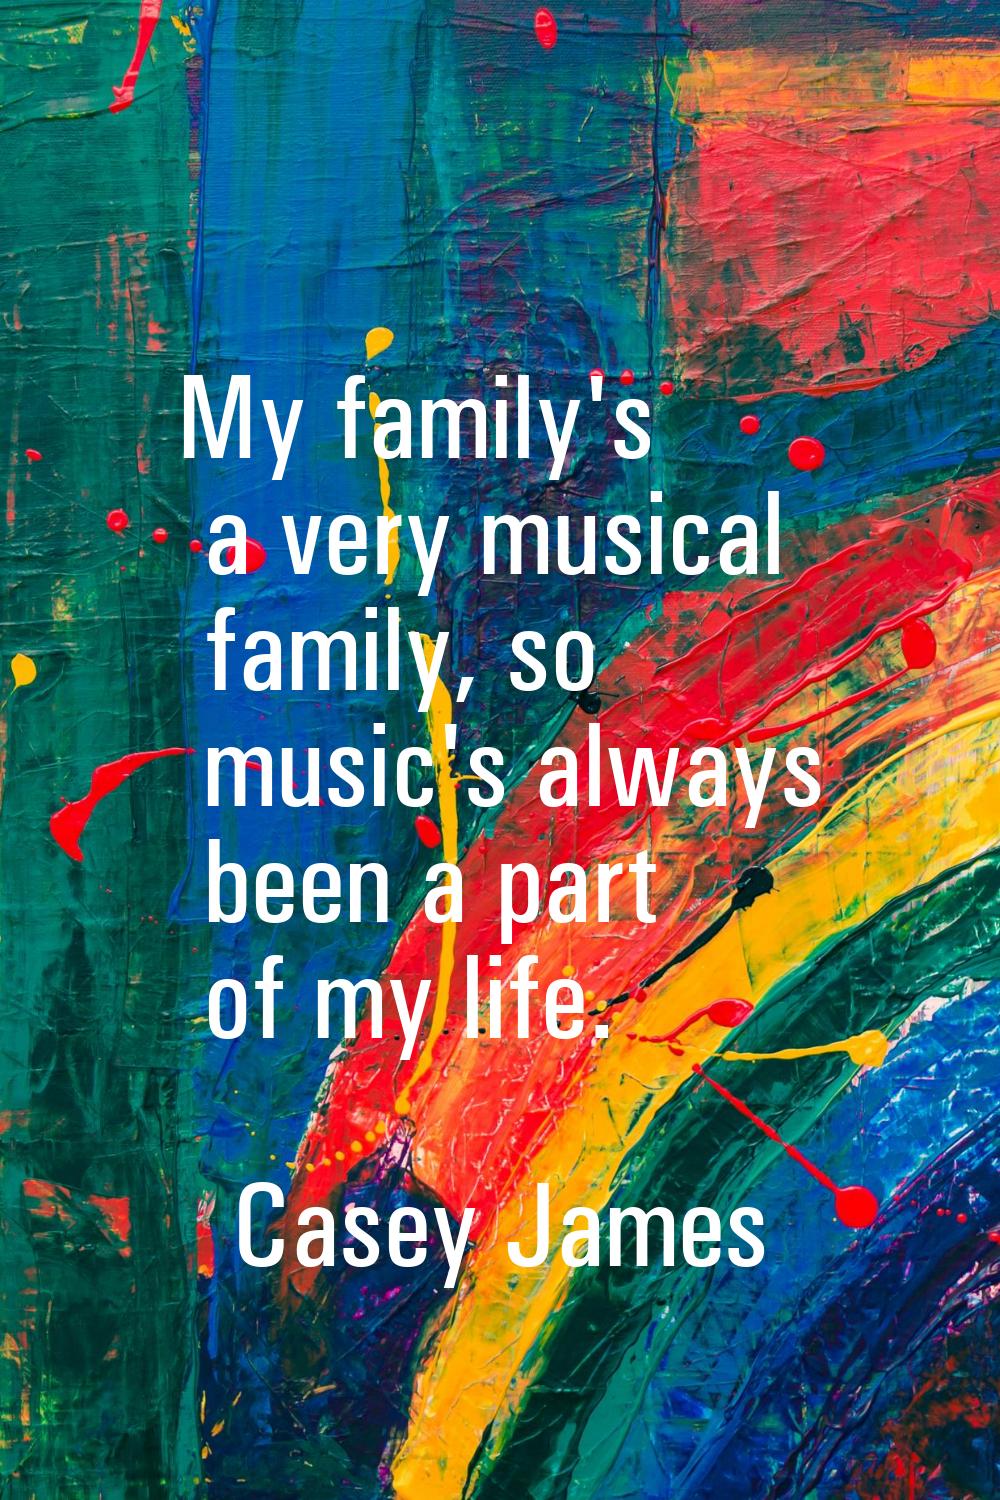 My family's a very musical family, so music's always been a part of my life.